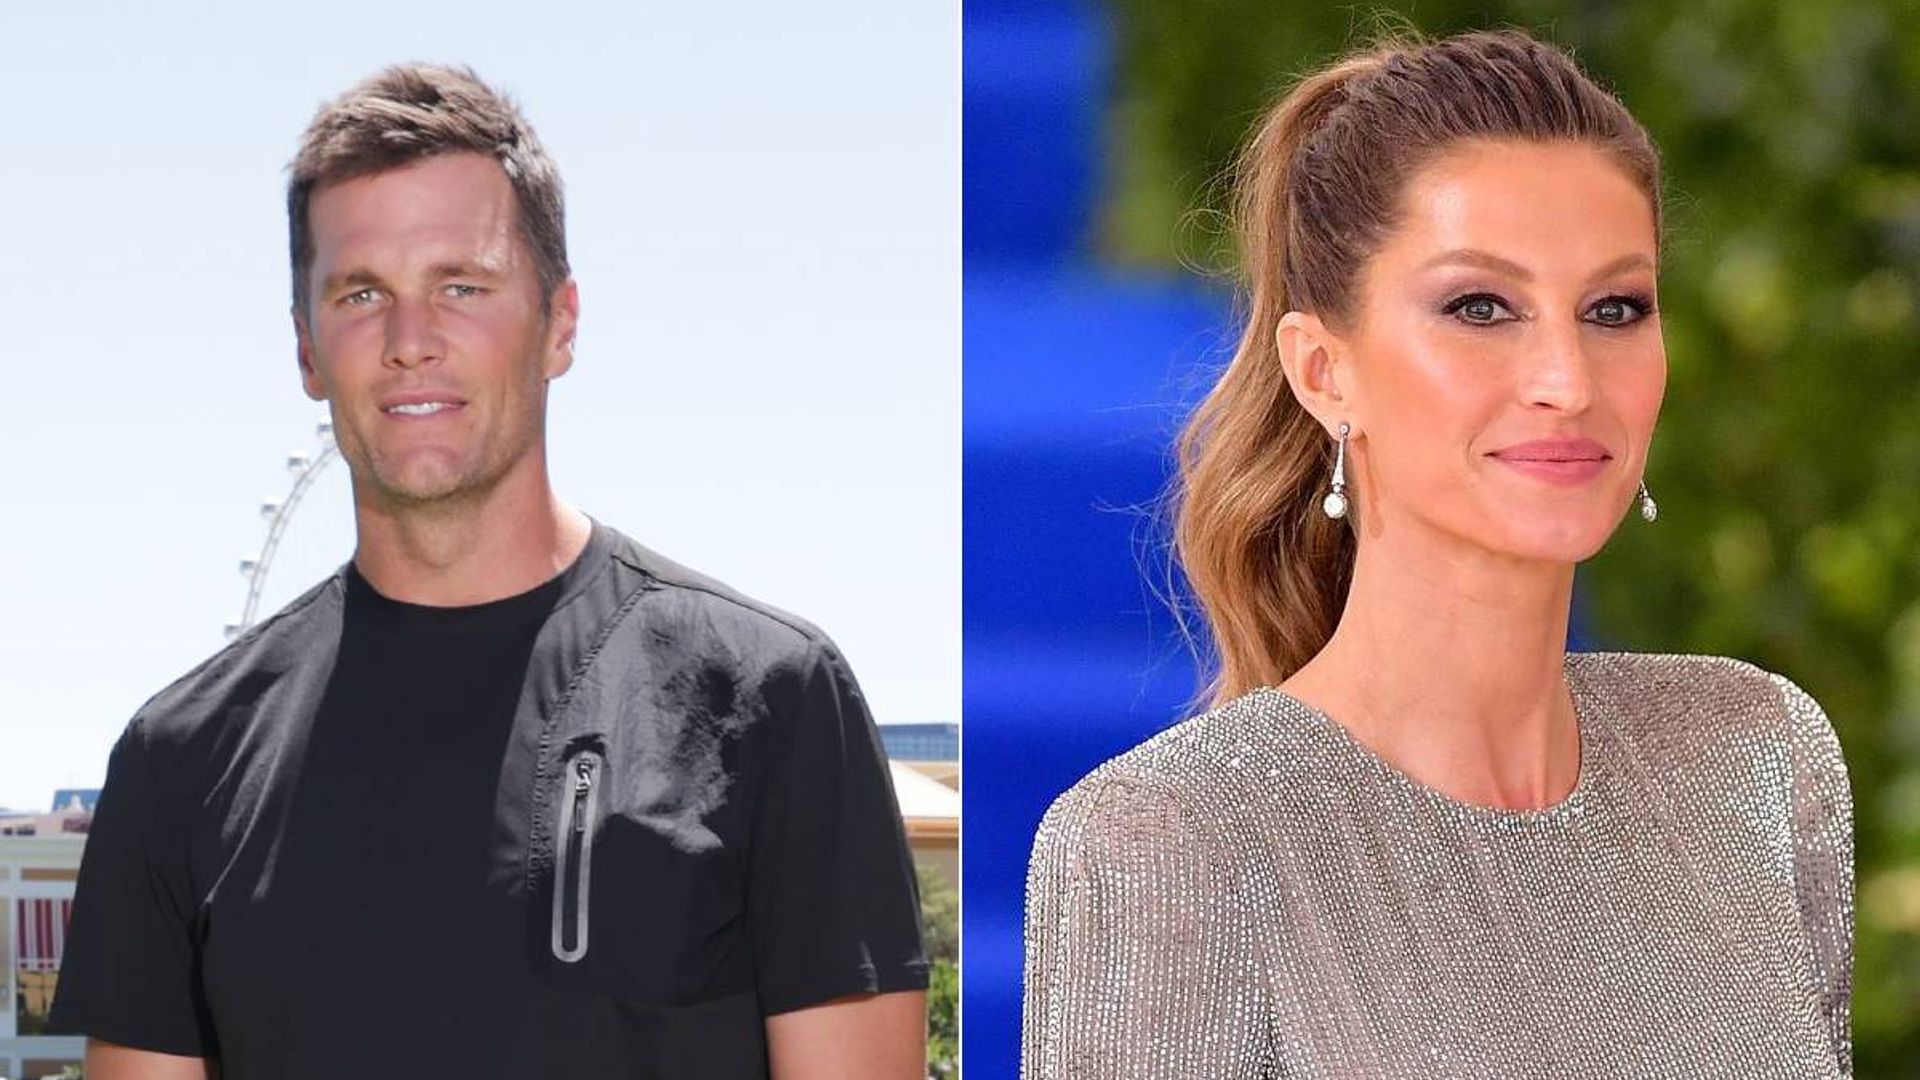 Gisele Bündchen inundated with support as she sends difficult